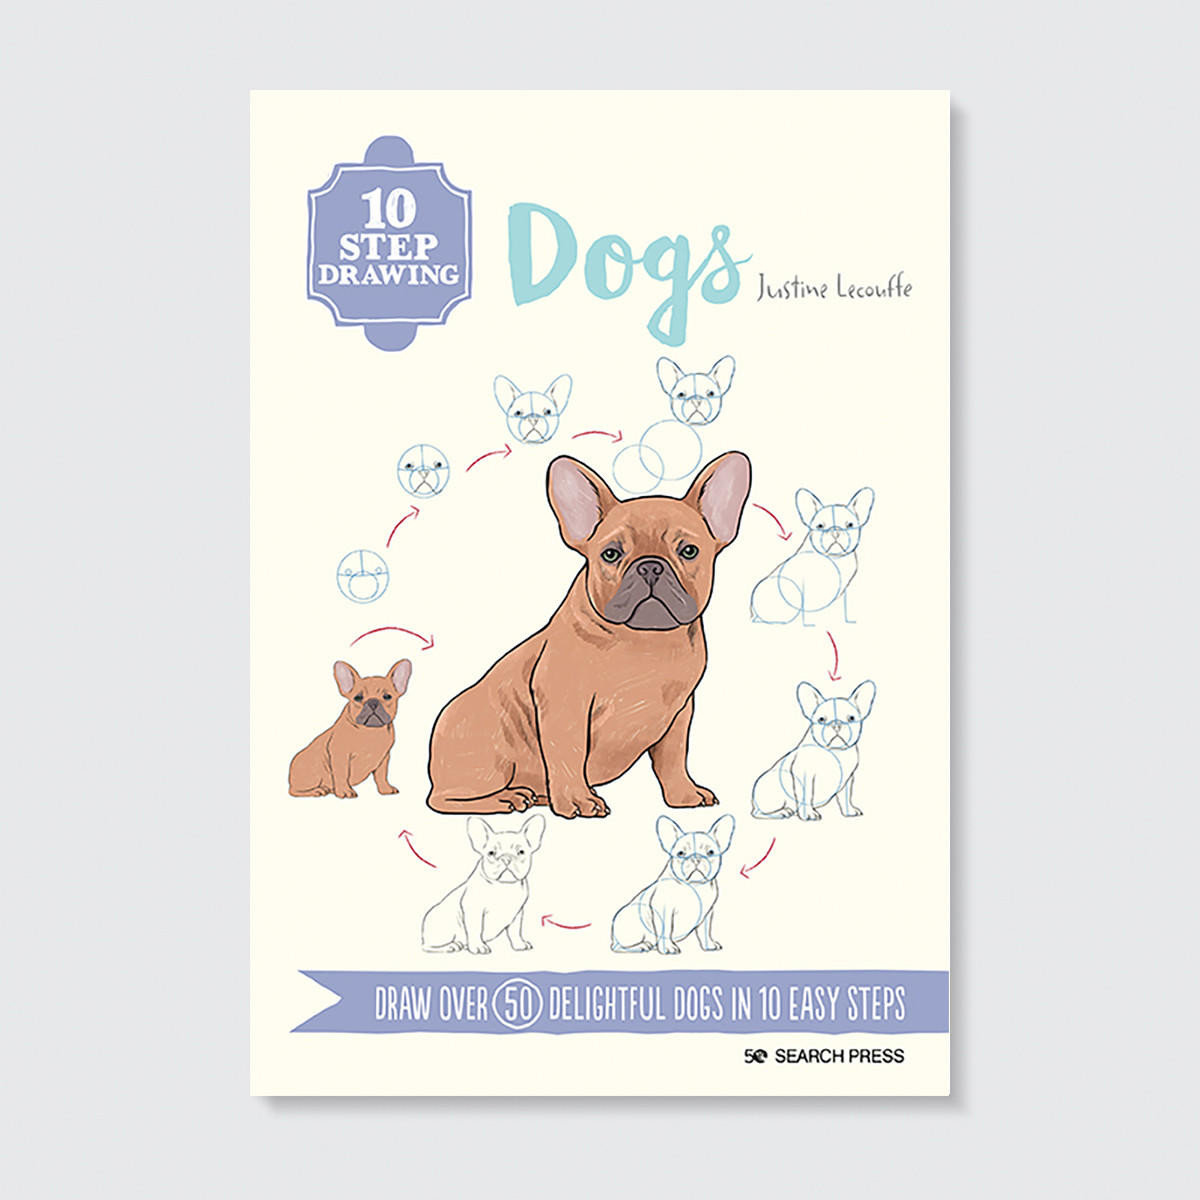 Search Press 10 Step Drawing Dogs by Justine Lecouffe